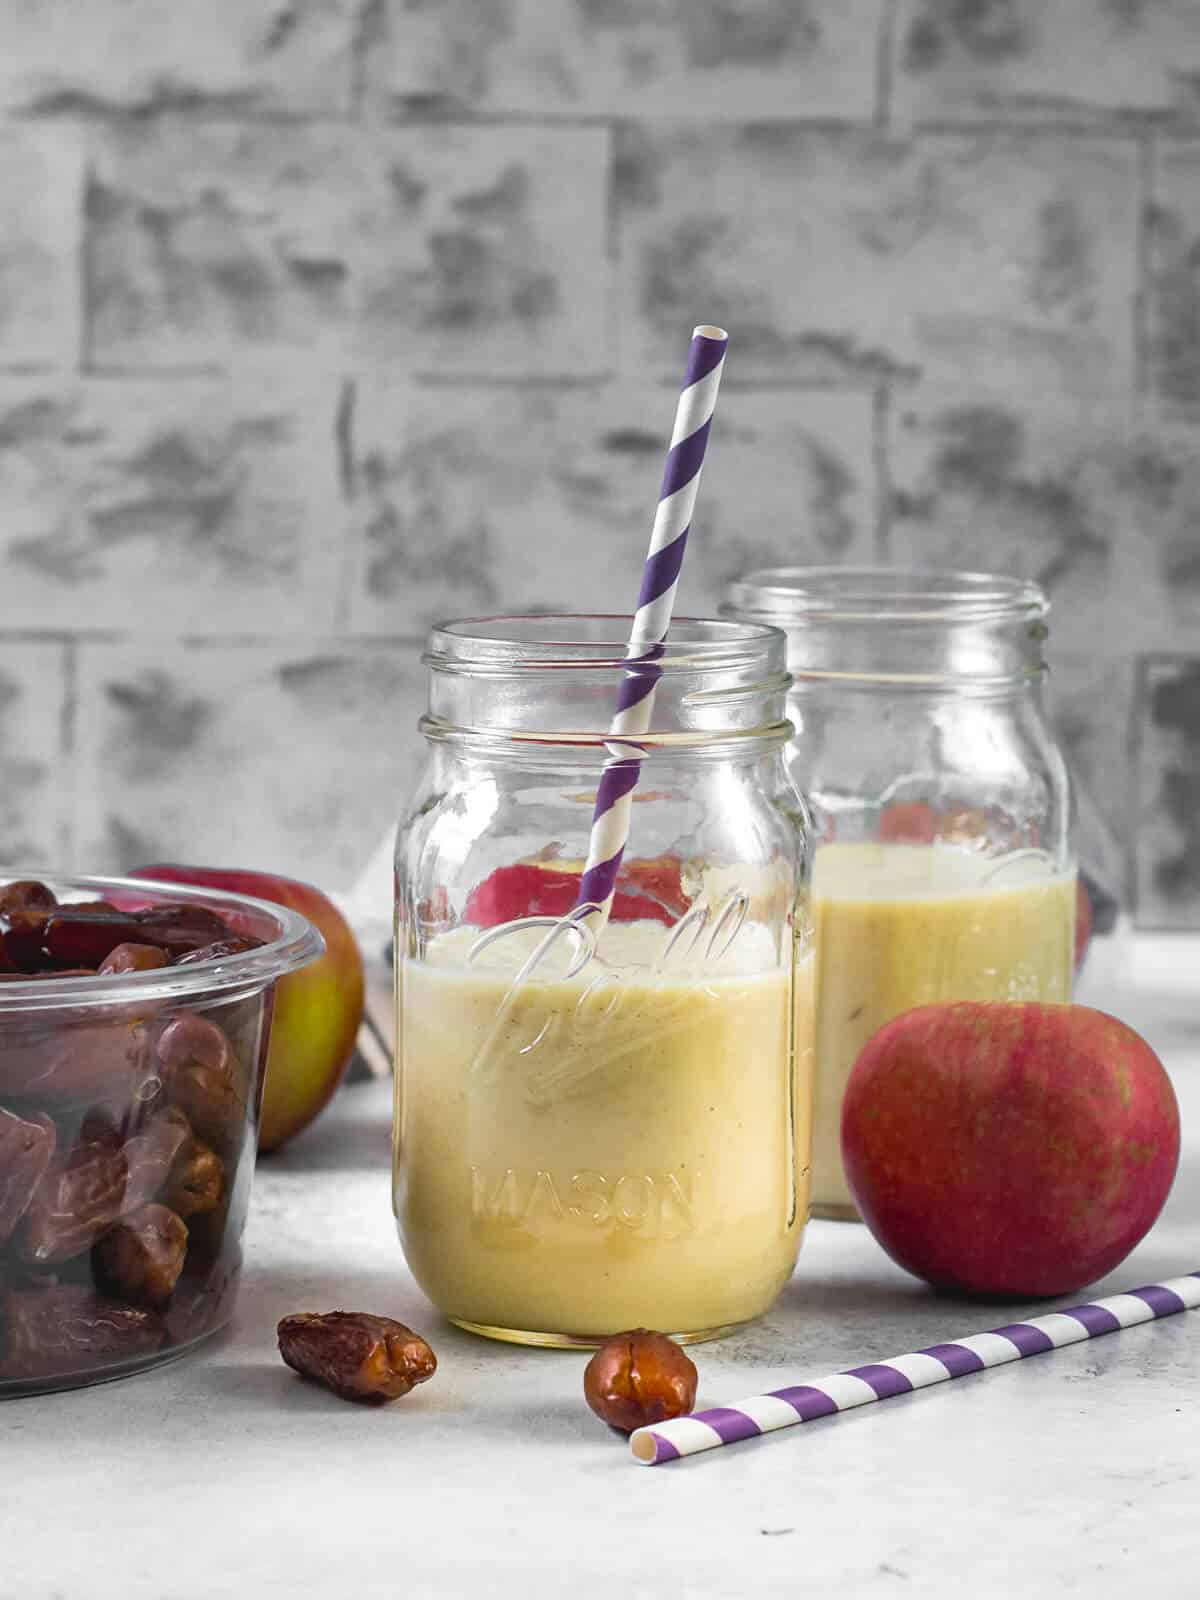 2 glass jars filled with Apple smoothie. A box of dates, an apple, along with a purple straw are on the side.